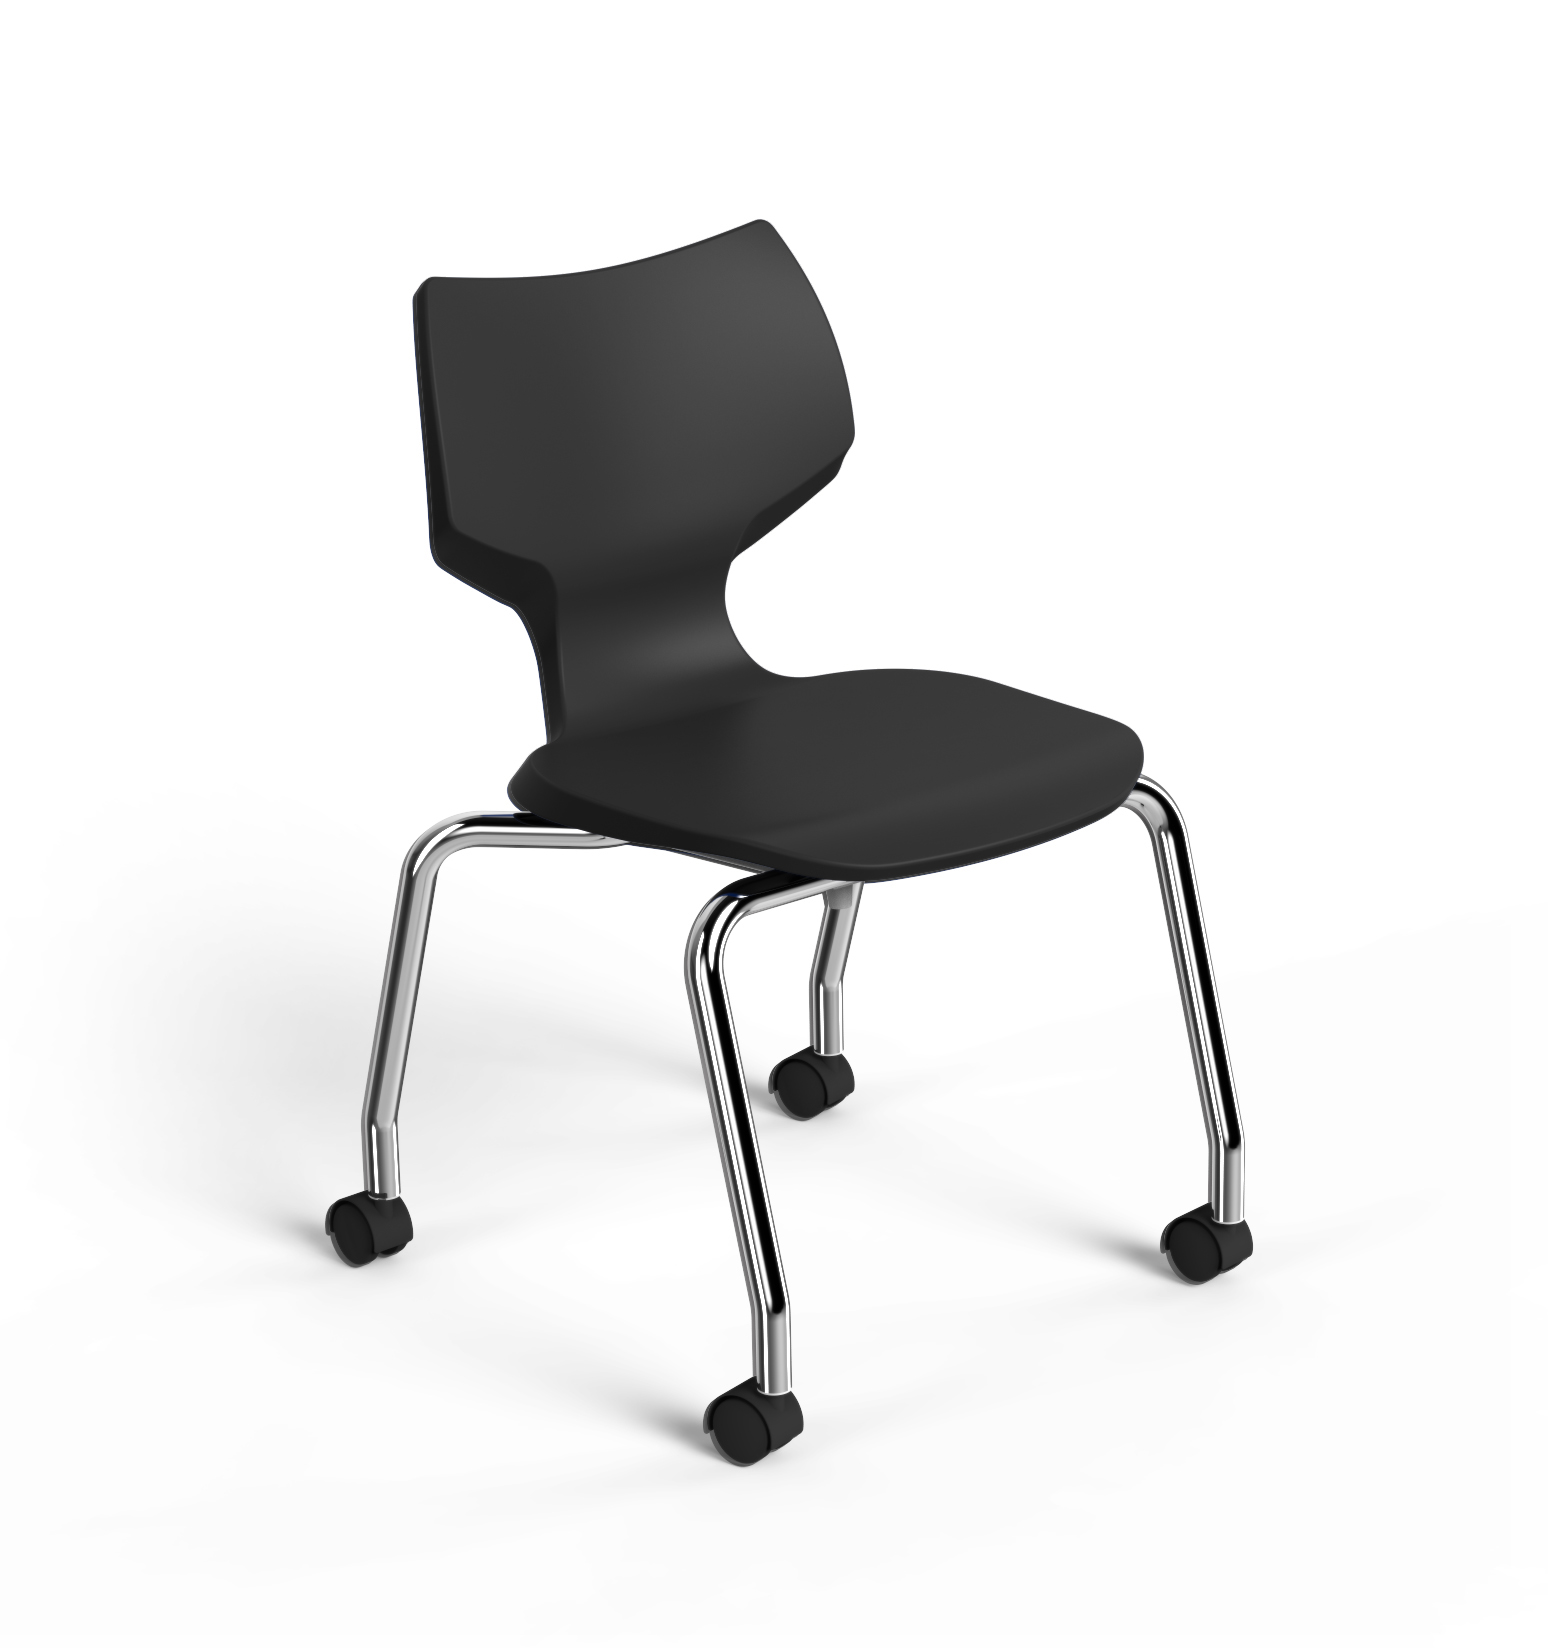 Flavors® Mobile Stack Chair